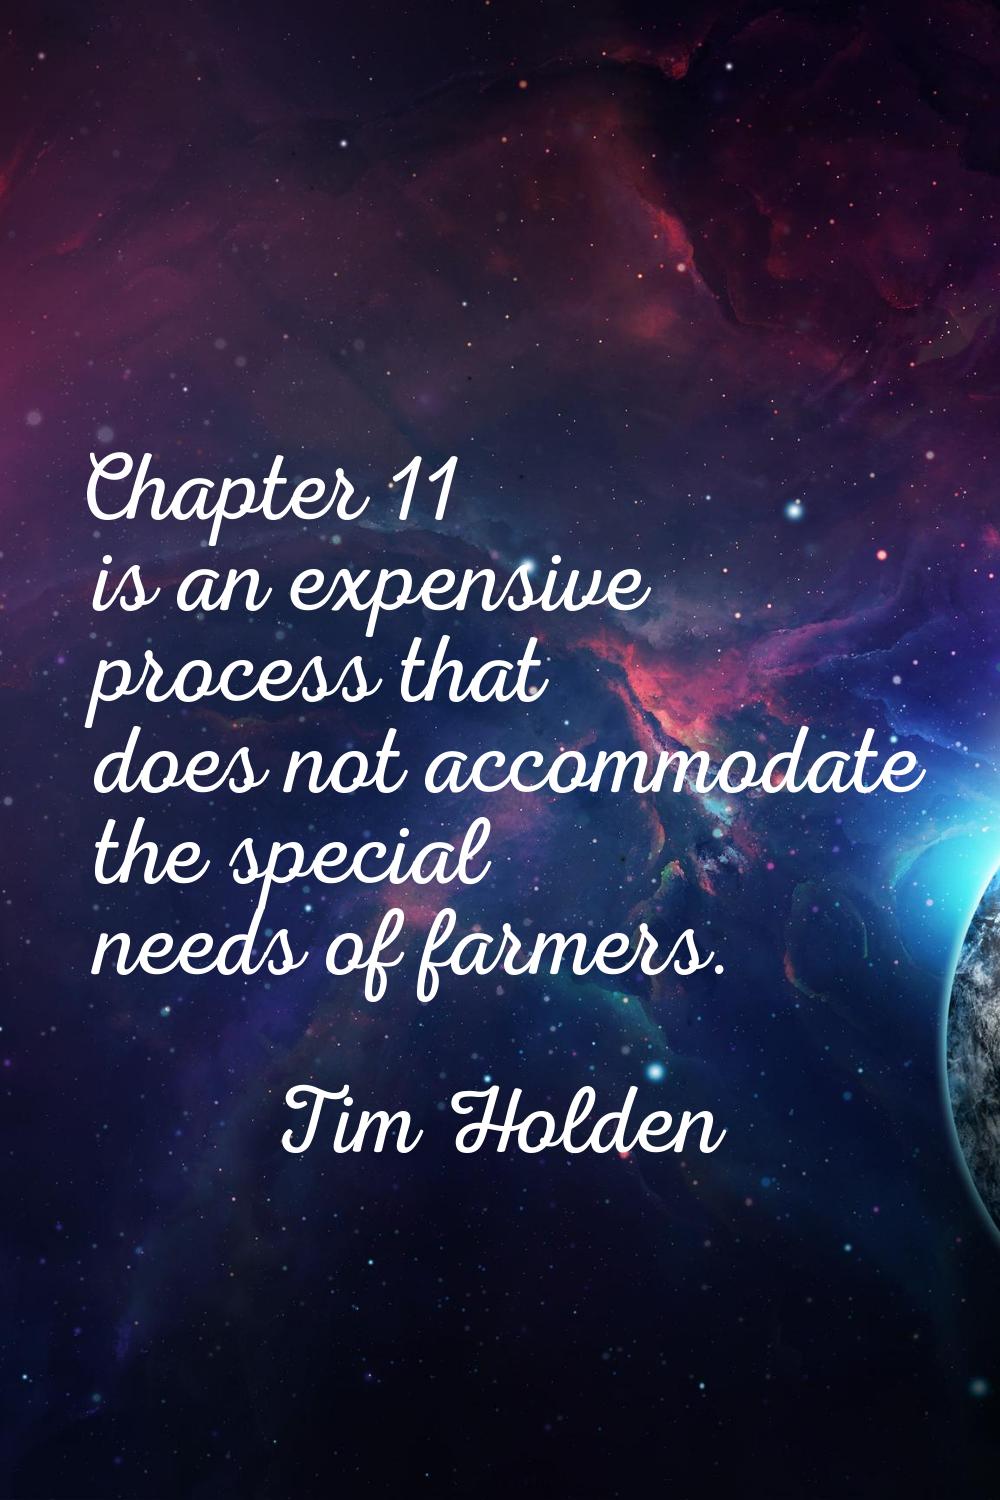 Chapter 11 is an expensive process that does not accommodate the special needs of farmers.